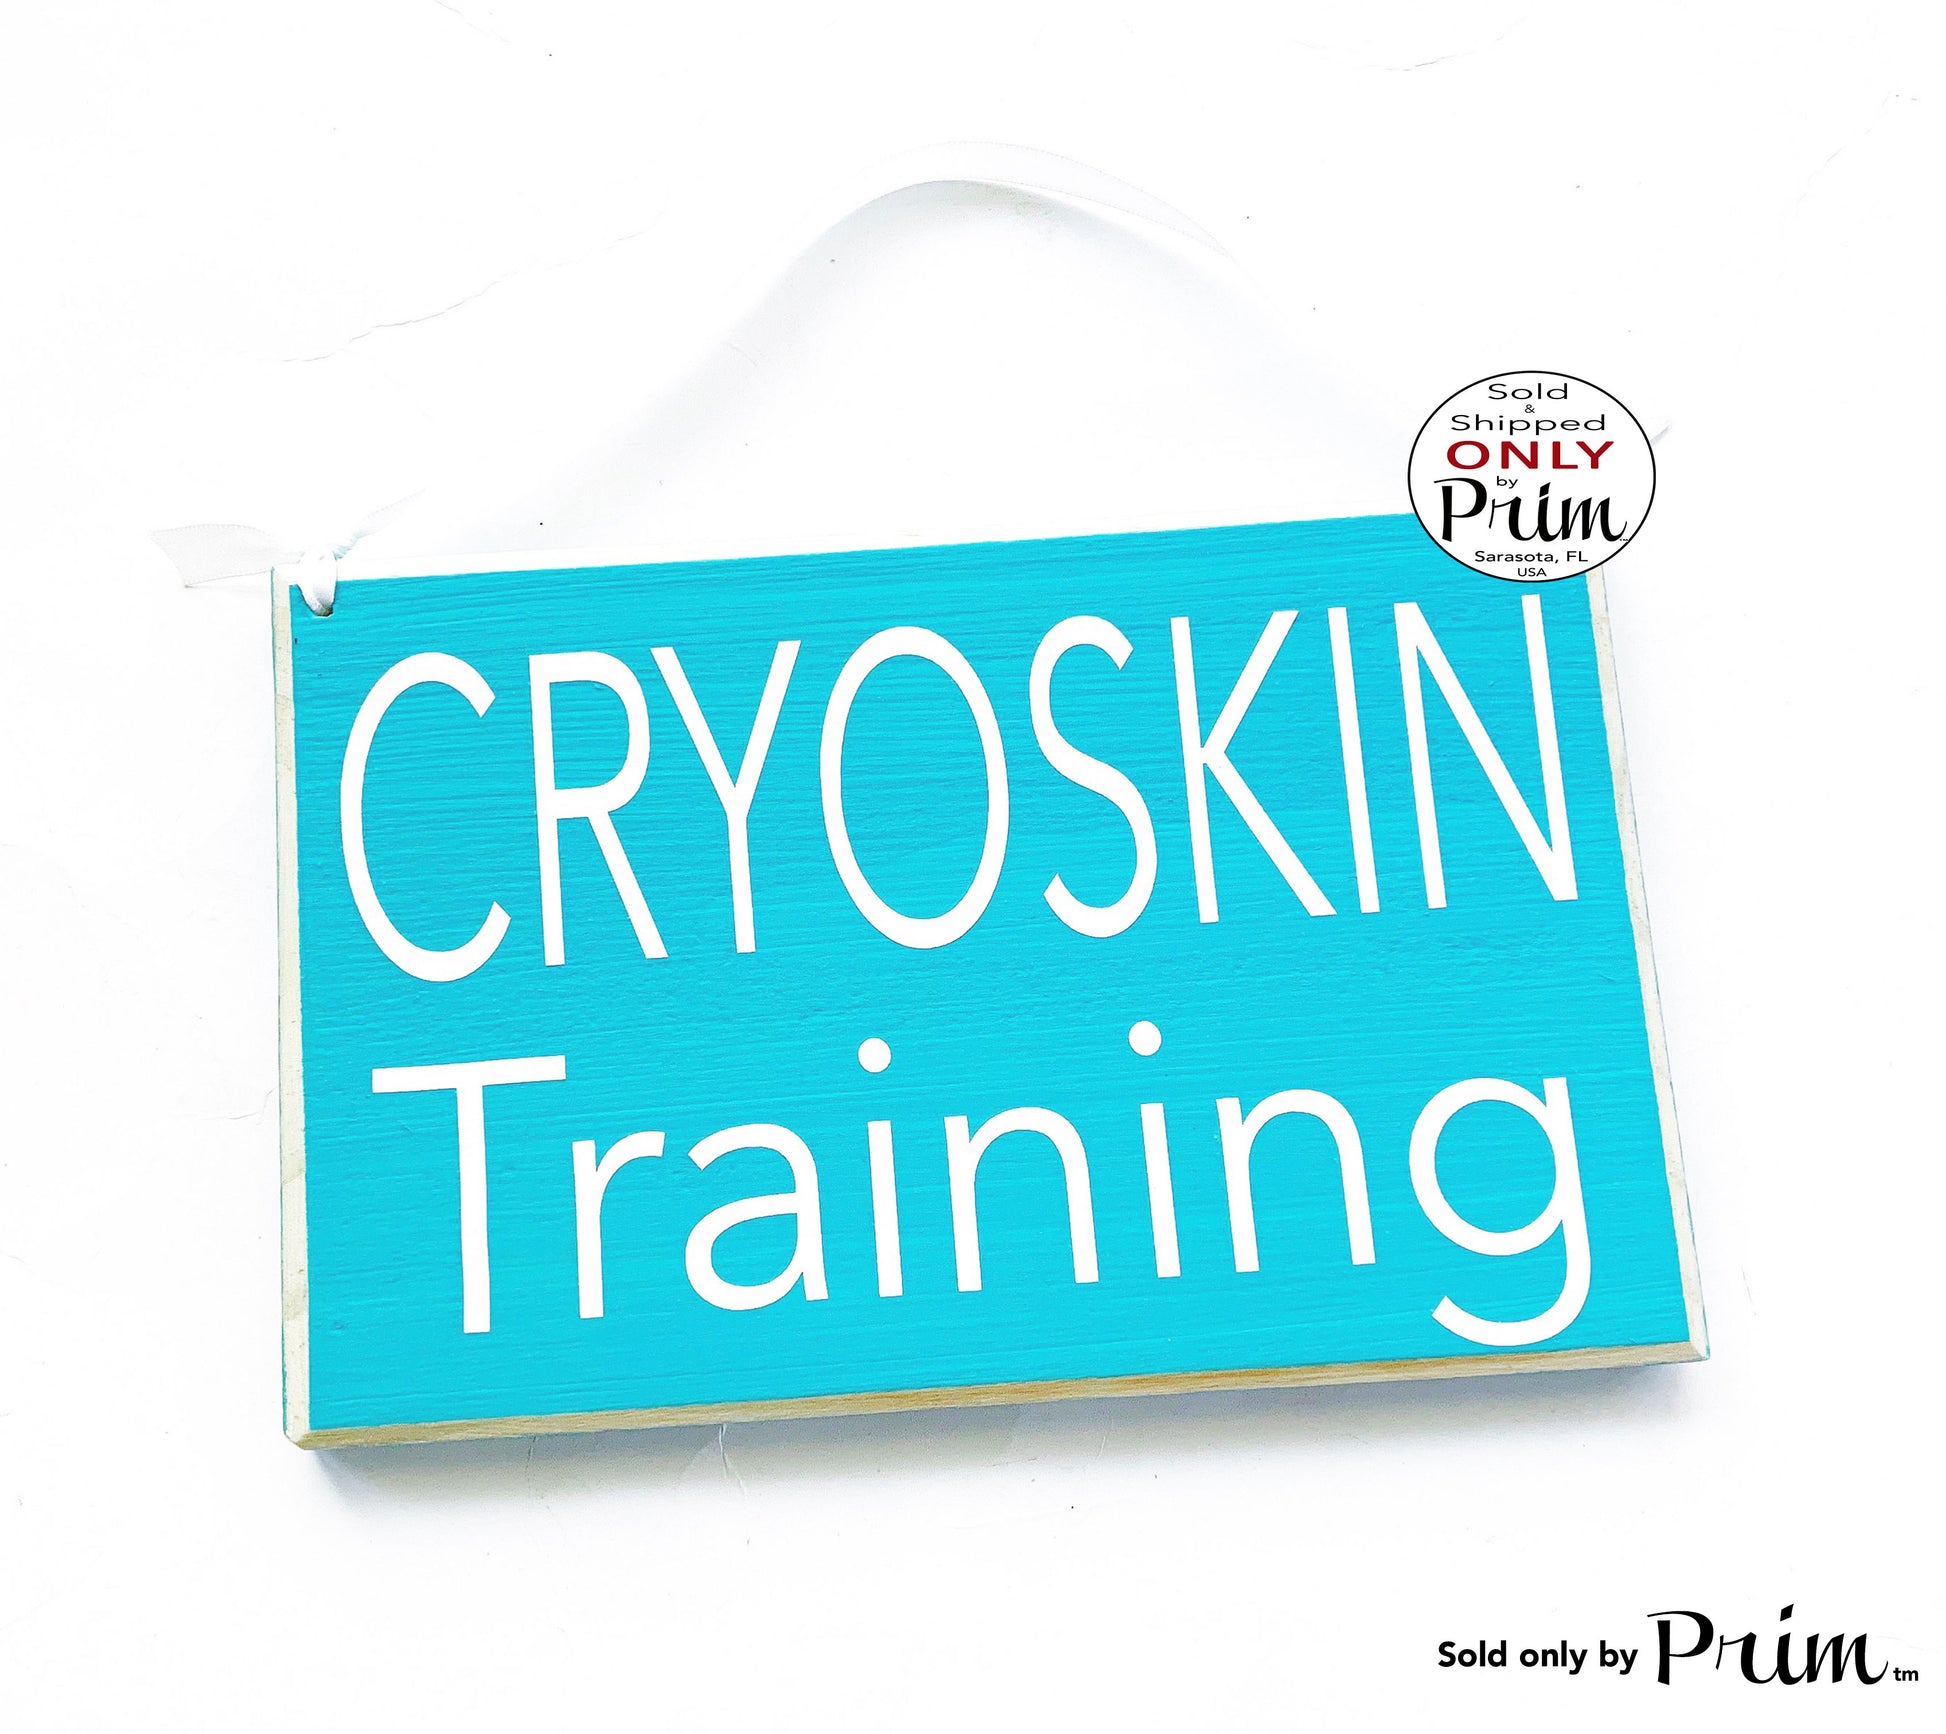 8x6 Cryoskin Training Custom Wood Sign In Session Please Do Not Disturb Progress Thermal Toning Therapy Wellness Orientation Door Plaque